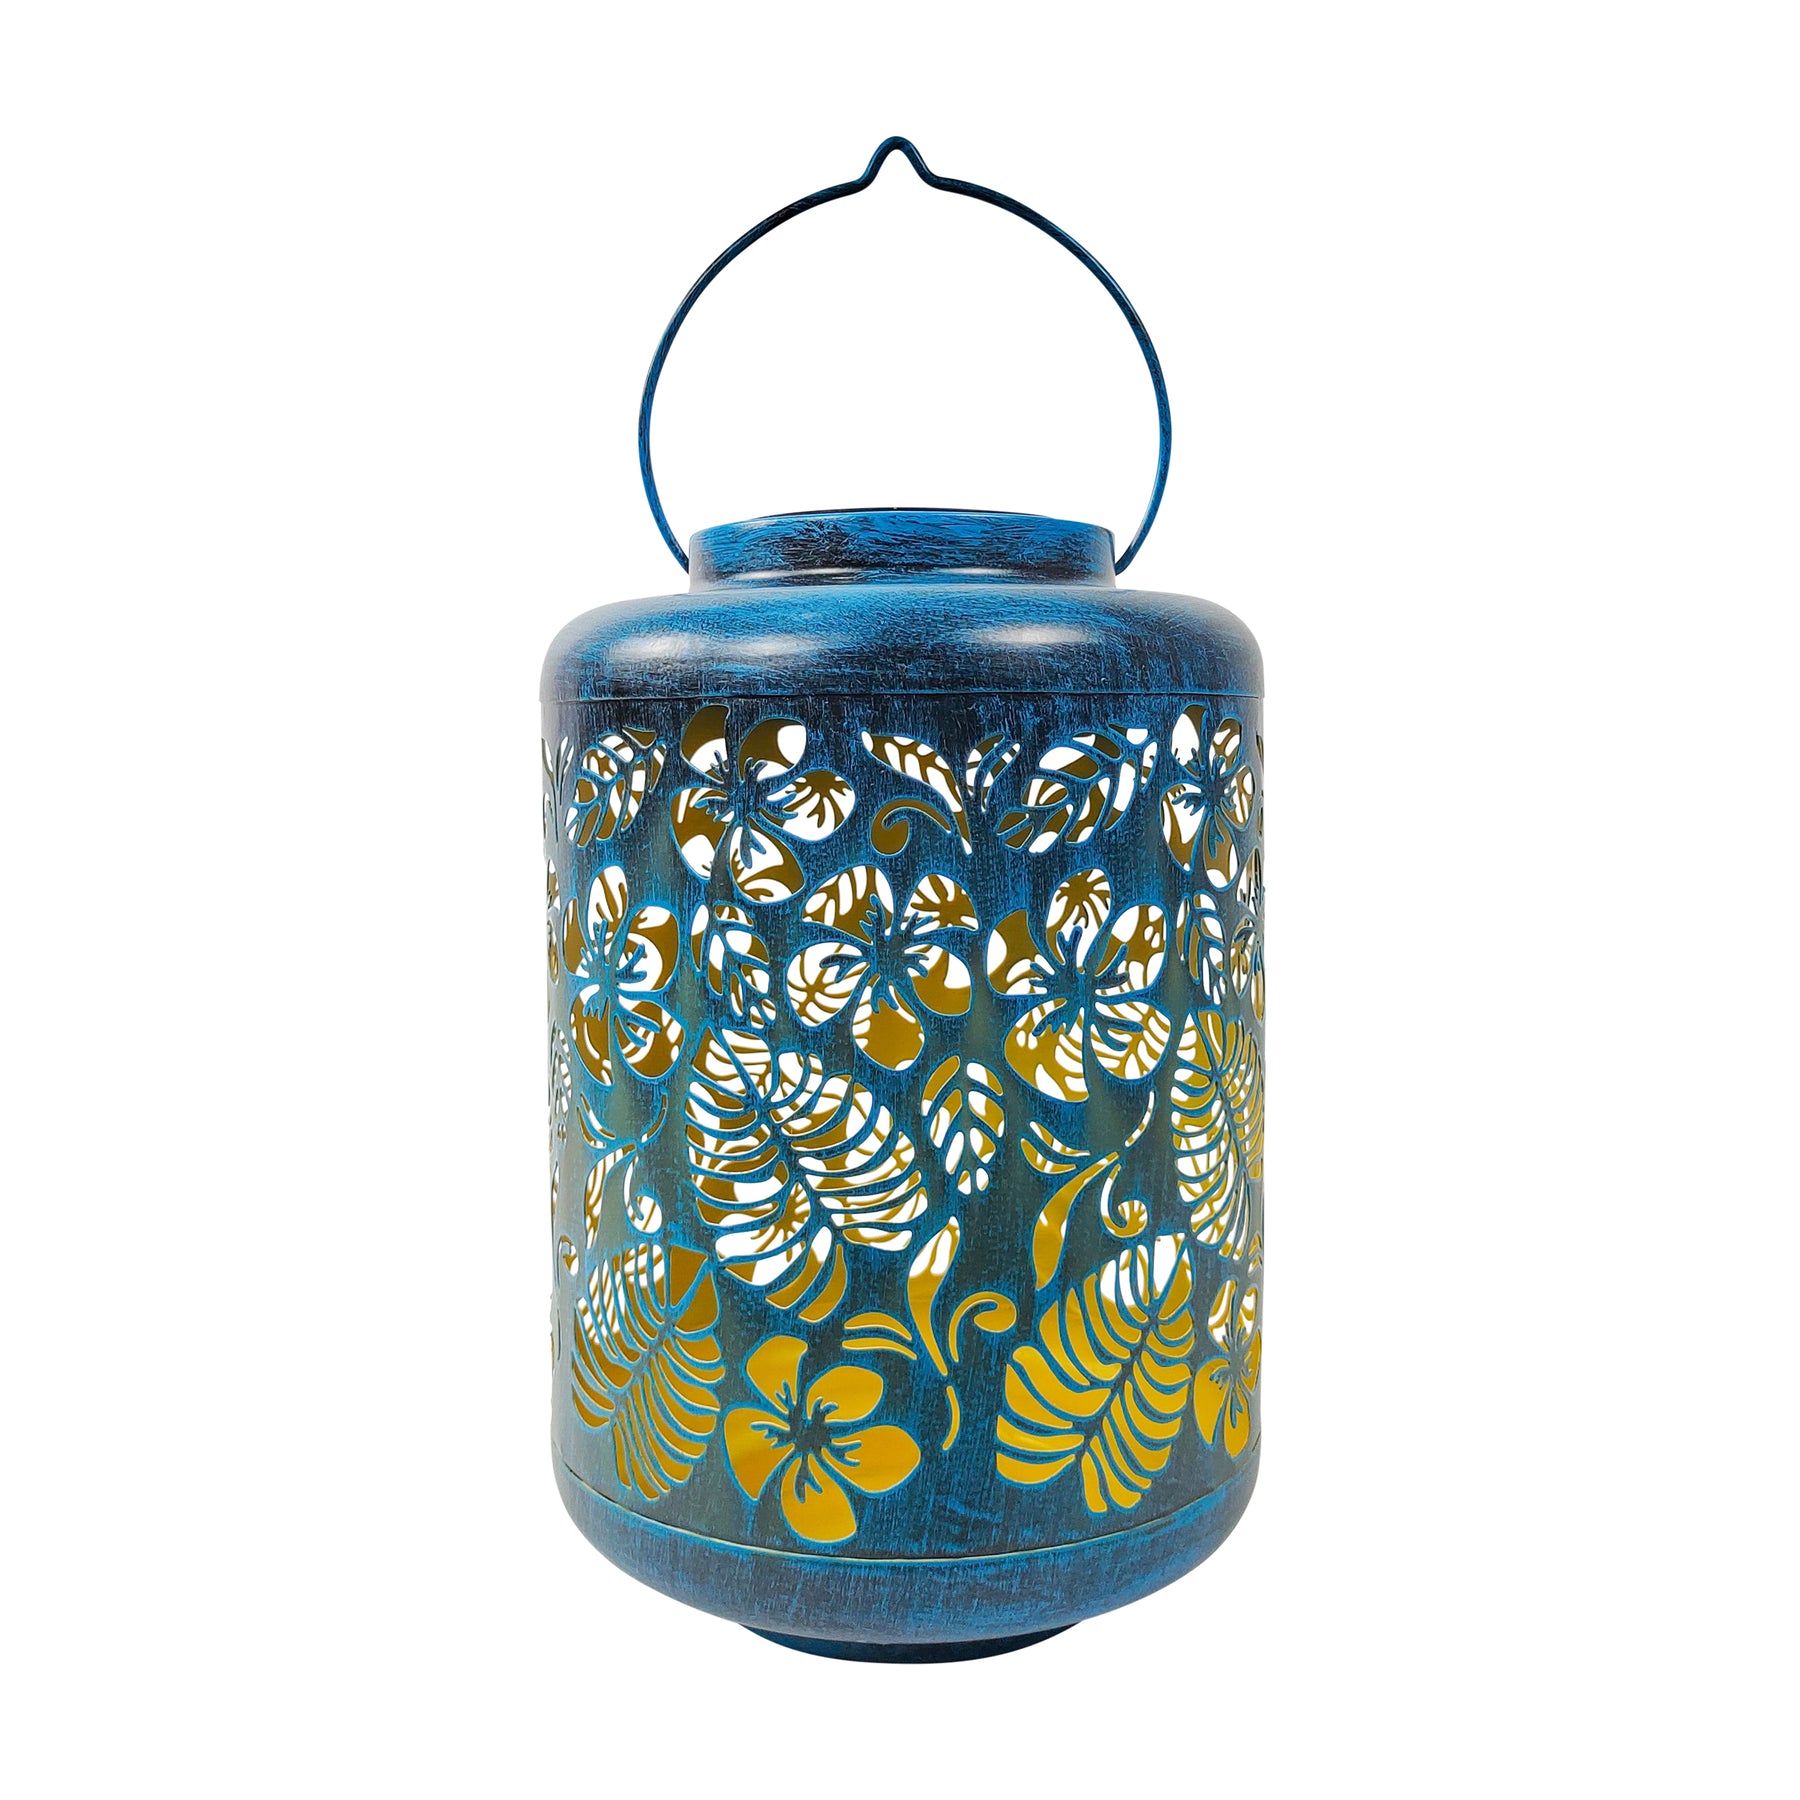 Bliss Outdoors 12-inch Tall Hanging and Tabletop Decorative Solar LED Lantern with Unique Tropical Flower Design and Antique Hand Painted Finish in the brushed blue variation.